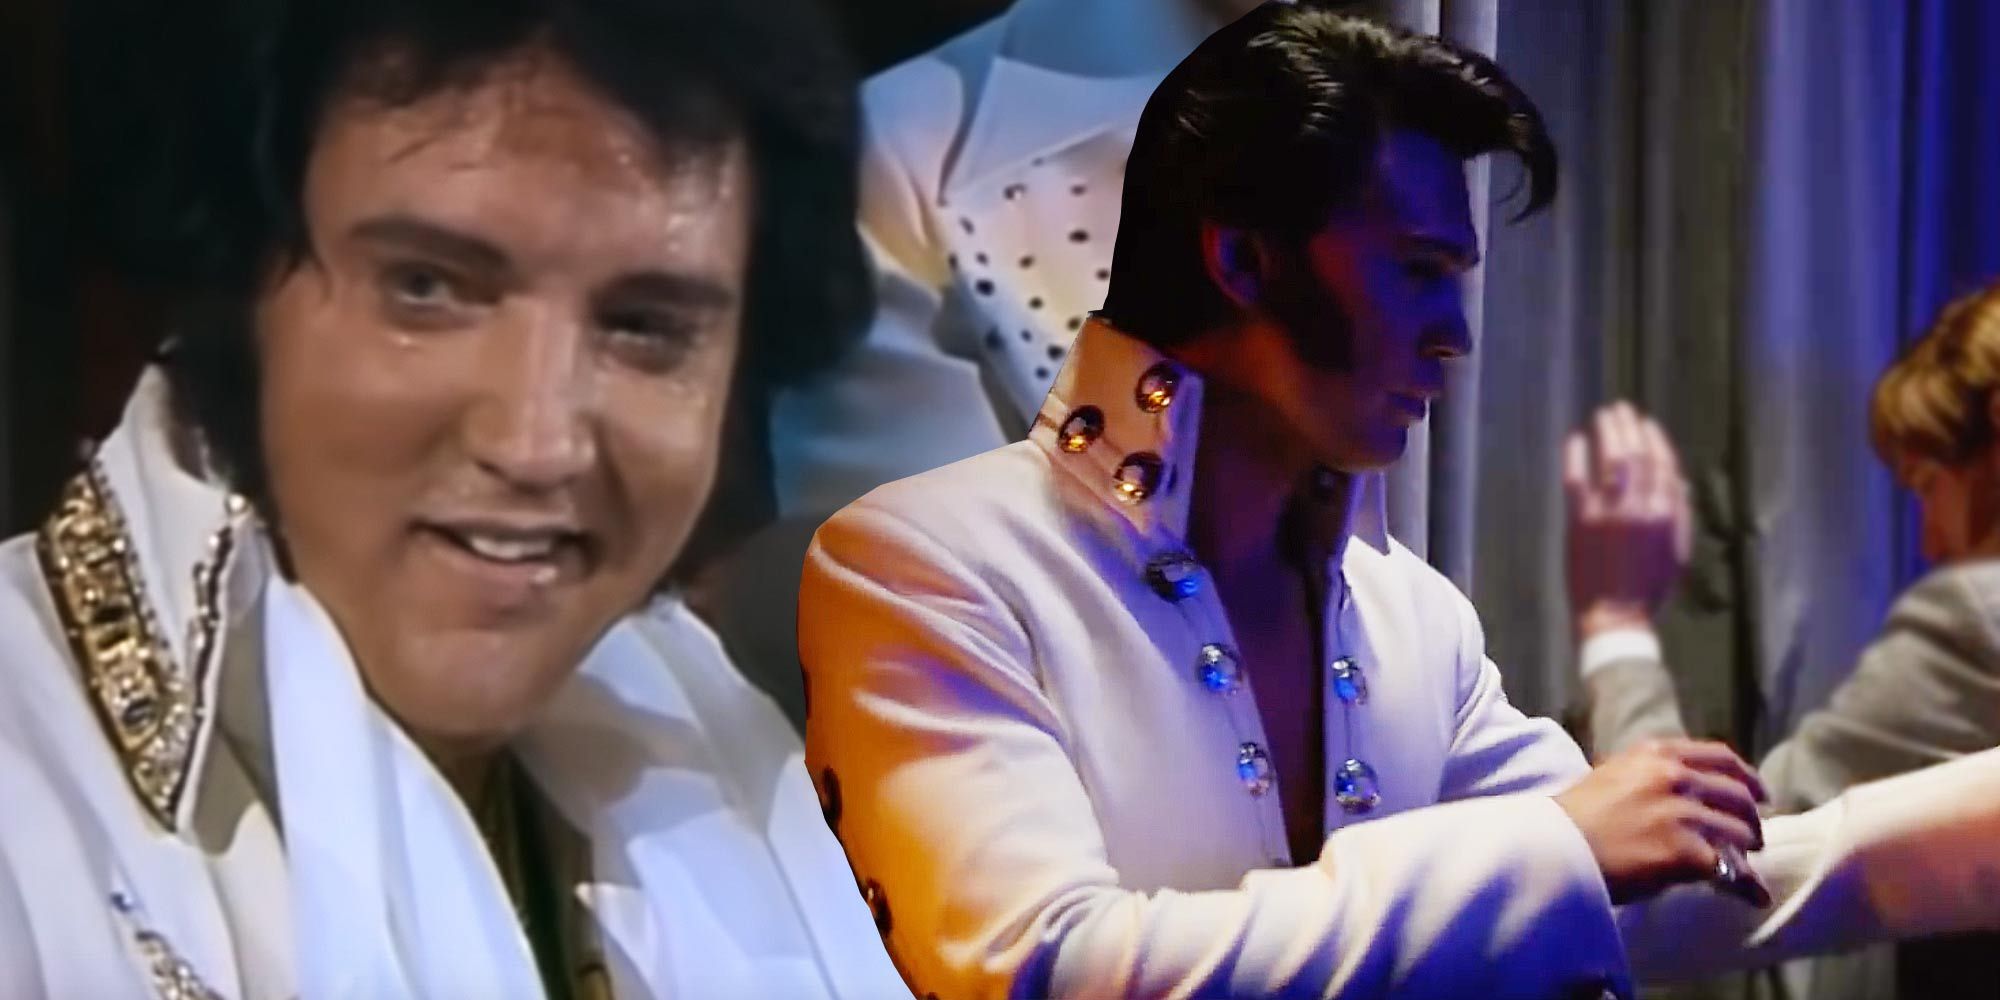 elvis performs unchained melody 